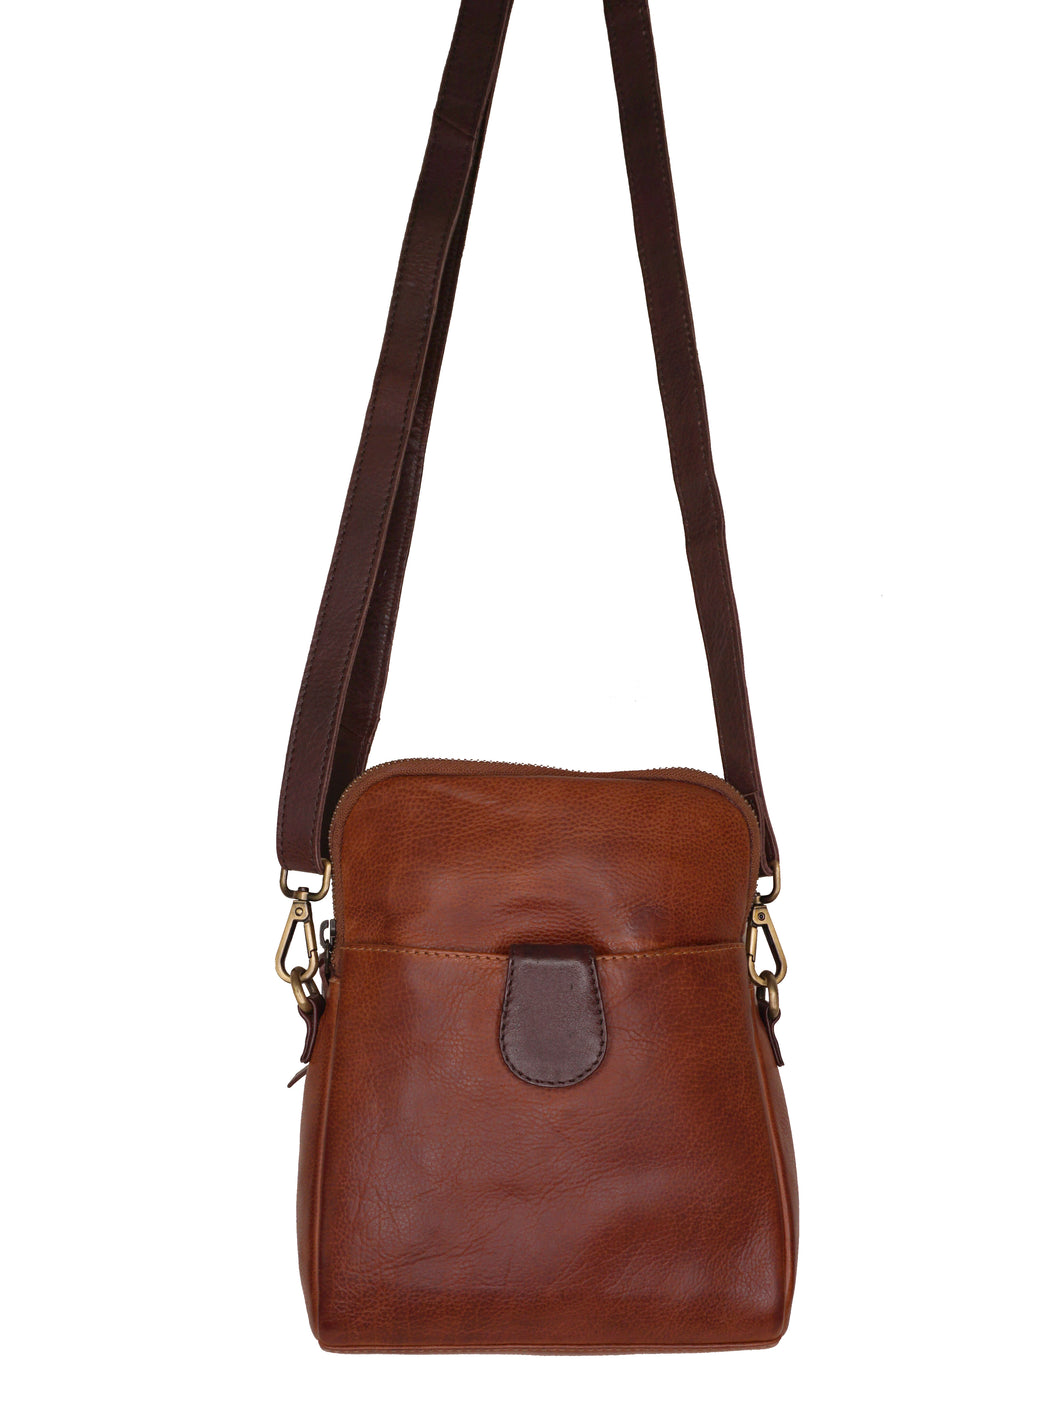 Willow (Waxed Leather) Small Cross Body Bag